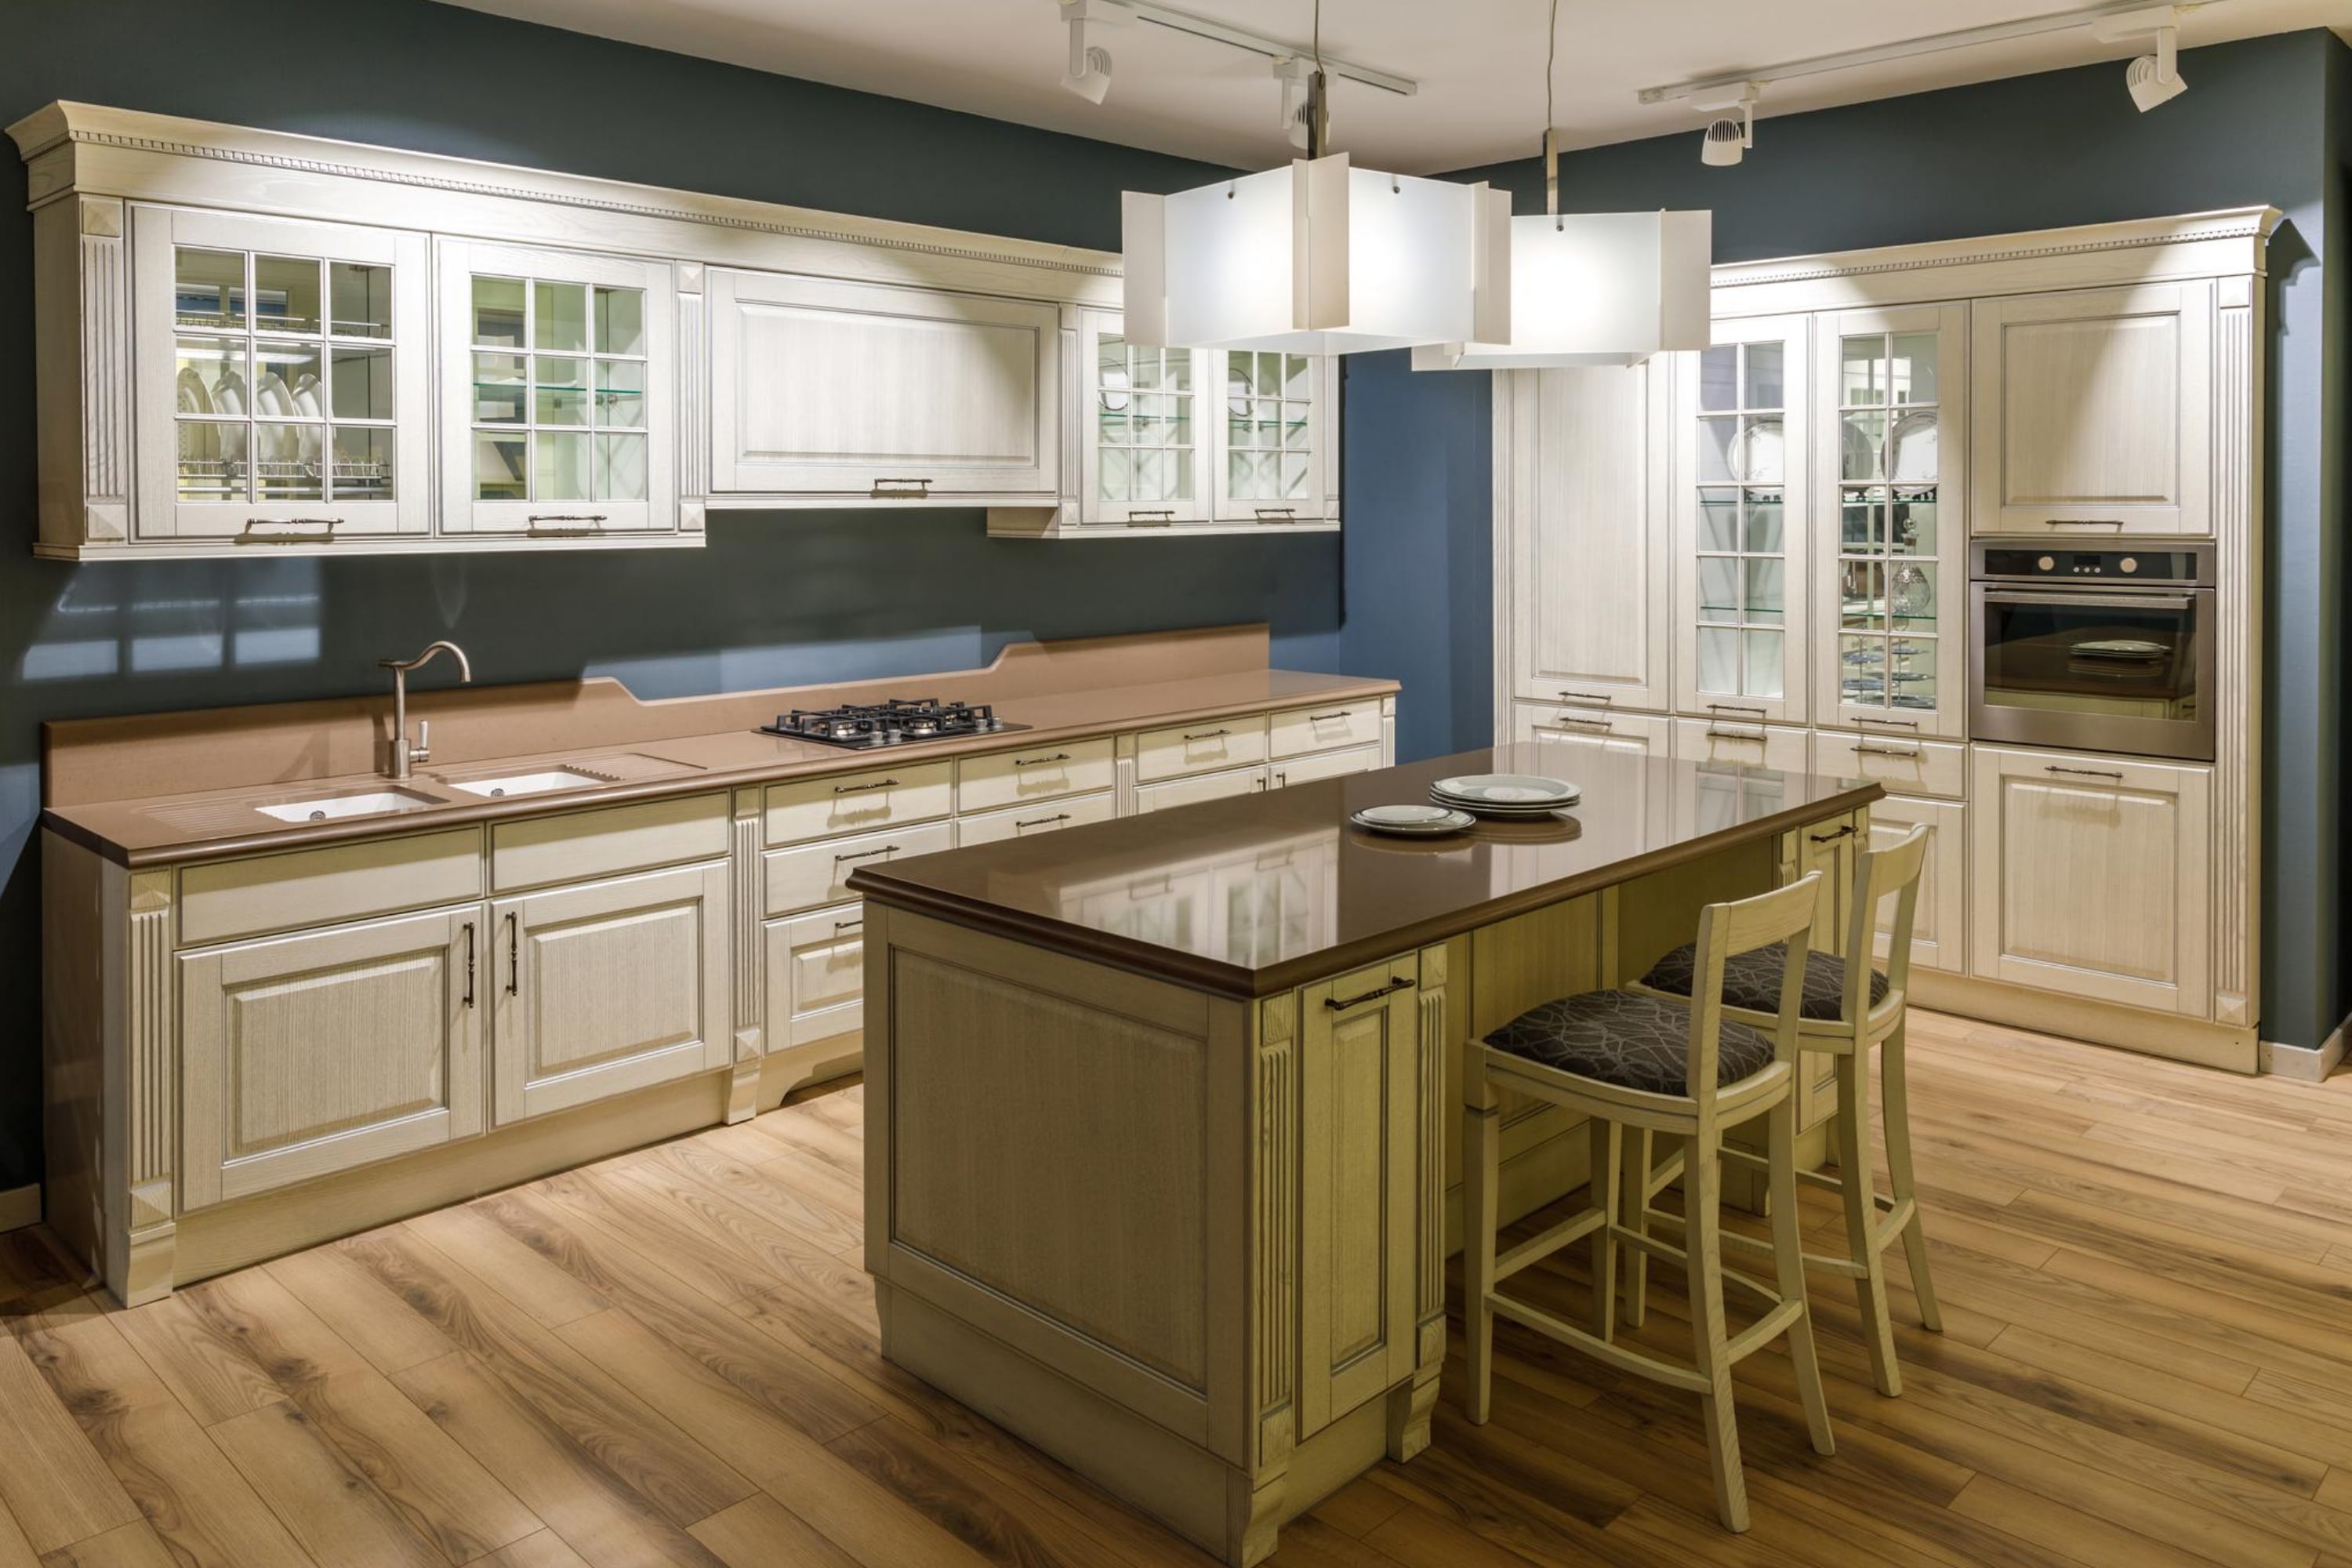 What Mistakes You Should Avoid When Painting Your Kitchen Cabinets